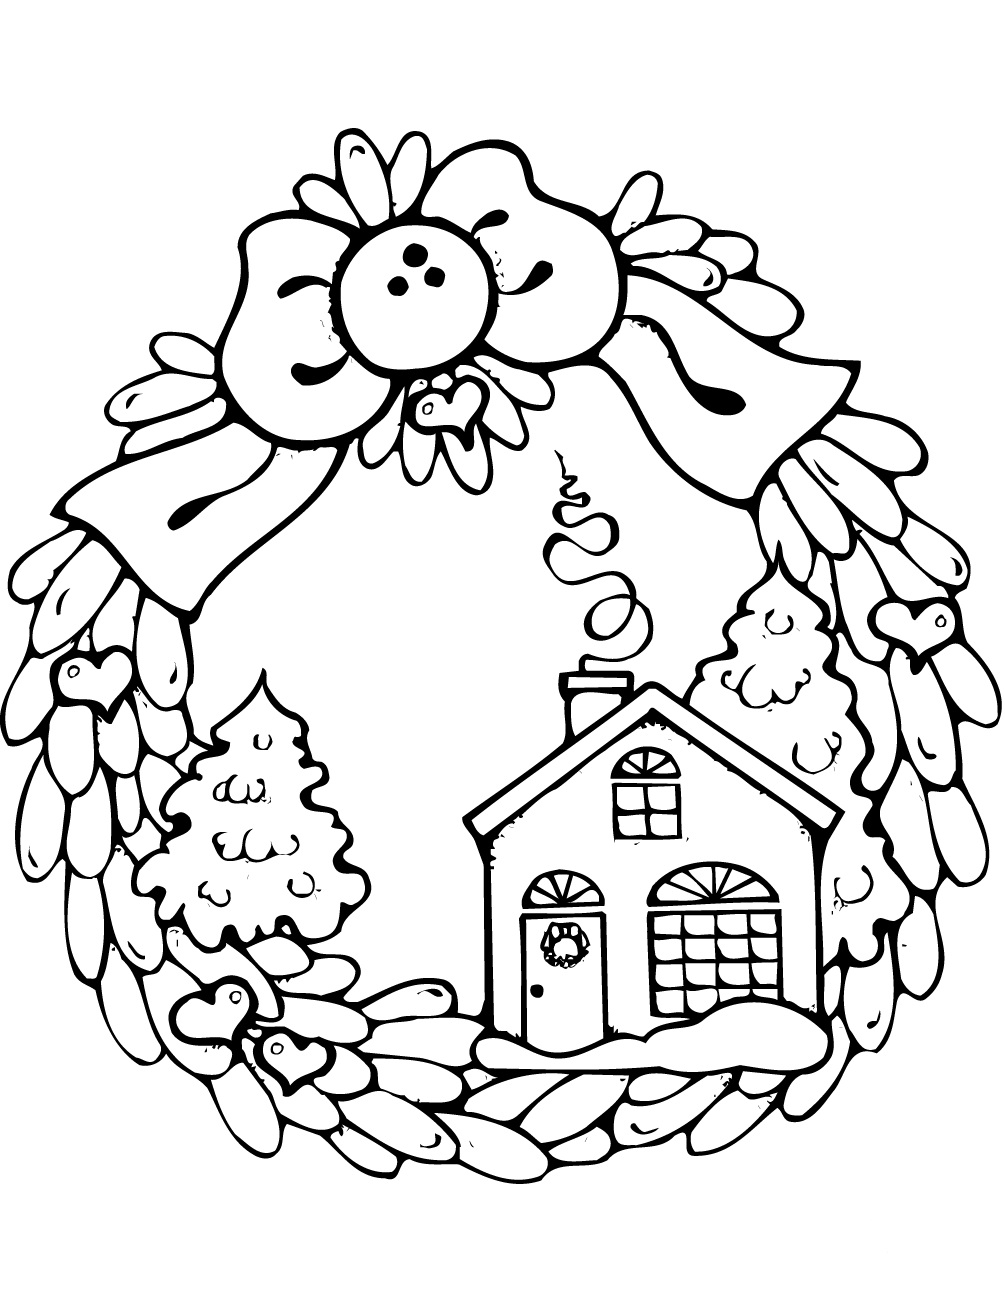 Download Santa loves his milk and cookies on Christmas eve Coloring Page - Free Coloring Pages Online